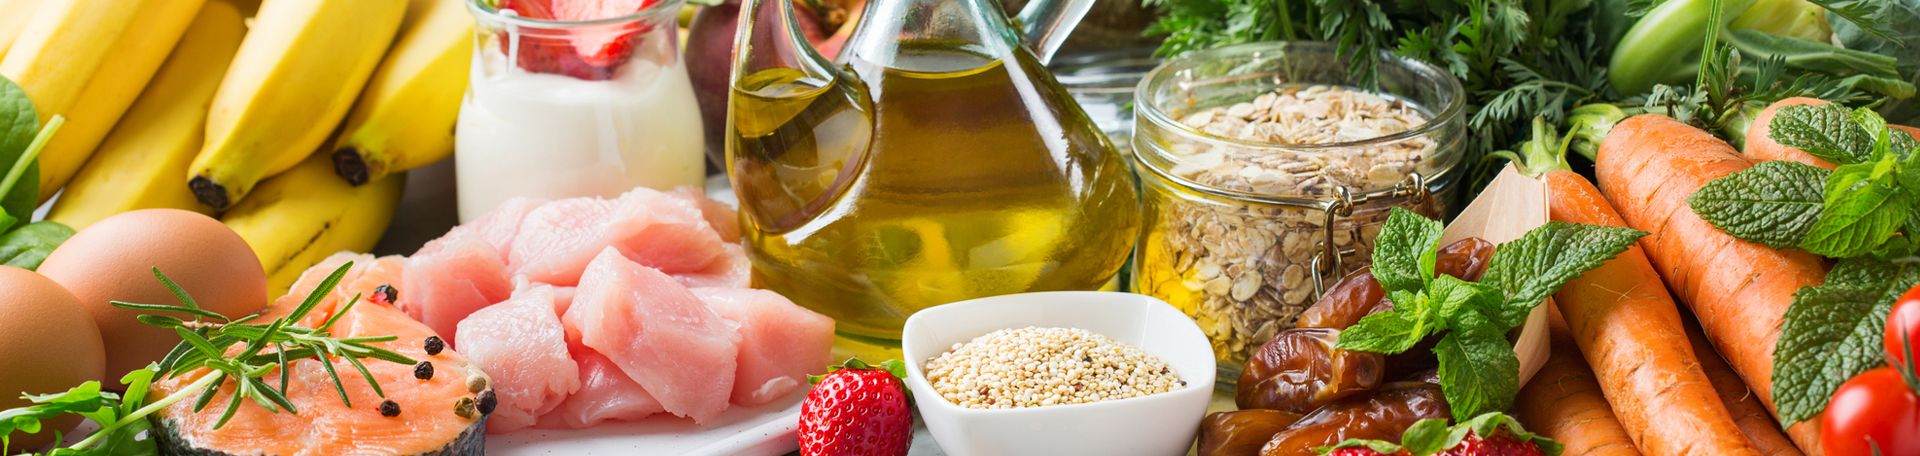 Augusta mediterranean diet good for body and mind, part of Augusta chiropractic treatment plan for some